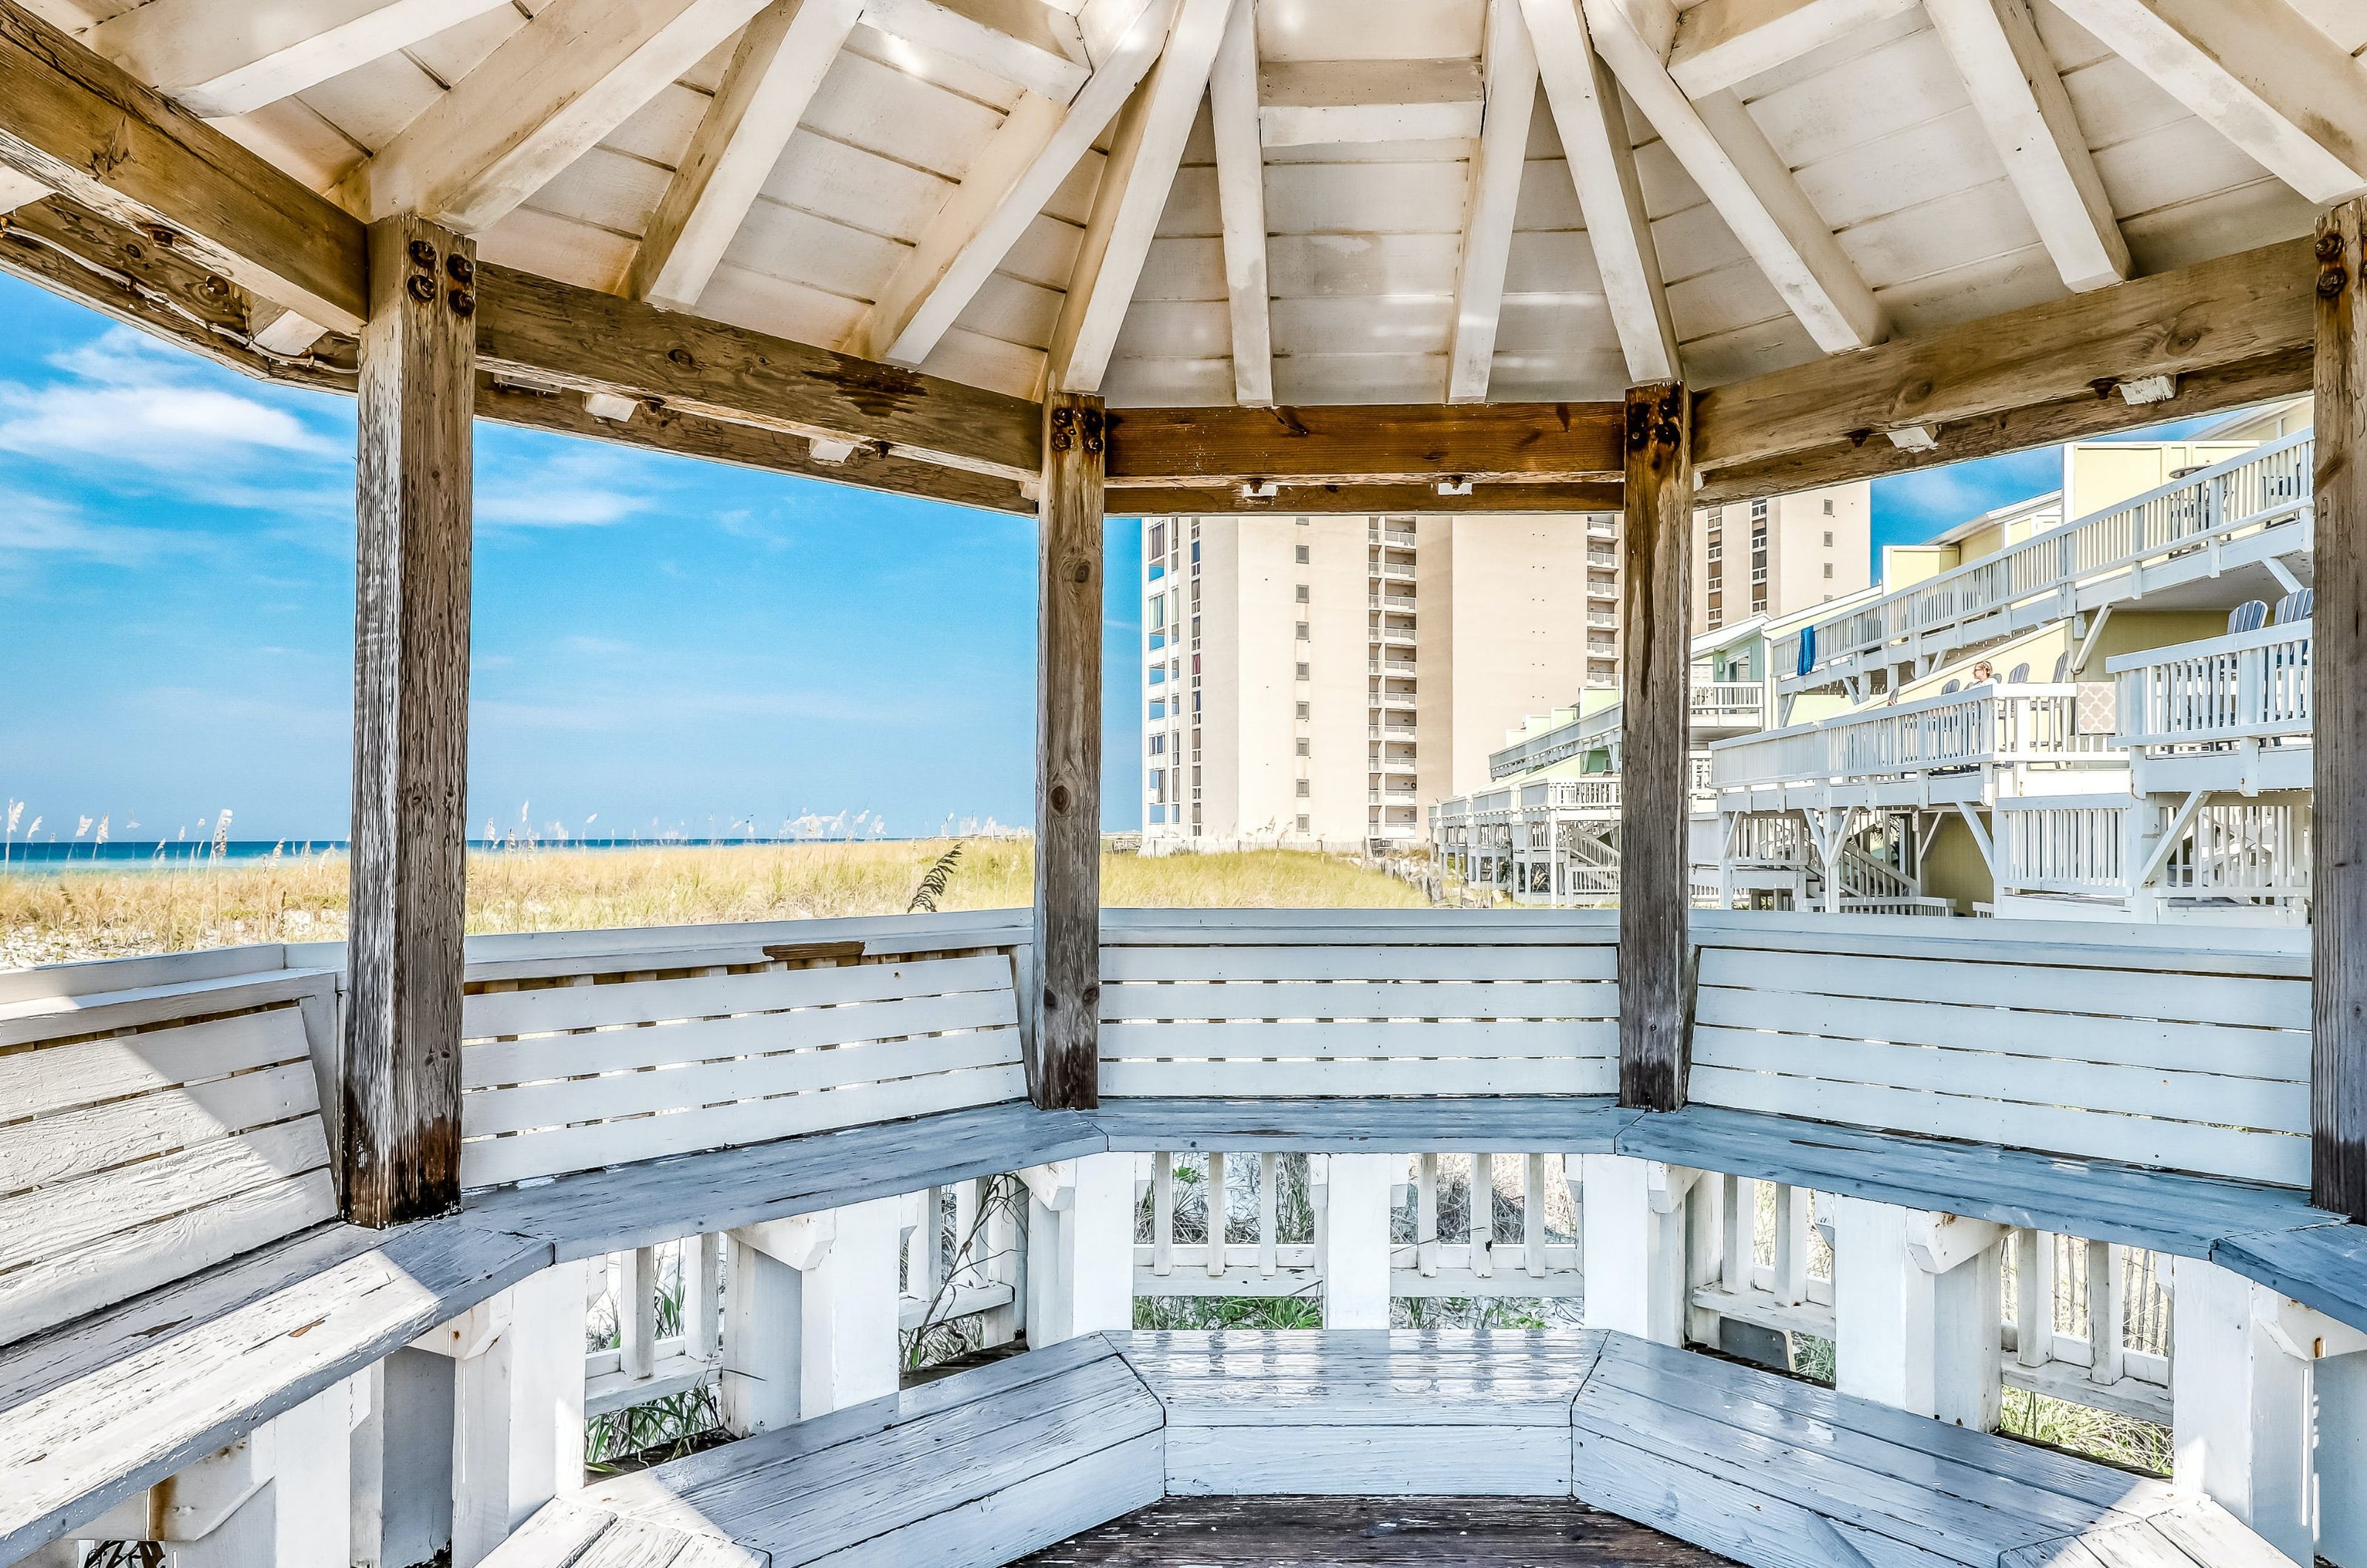 Southbay by the Gulf - https://www.beachguide.com/destin-vacation-rentals-southbay-by-the-gulf--466-0-202310-4891.jpg?width=185&height=185